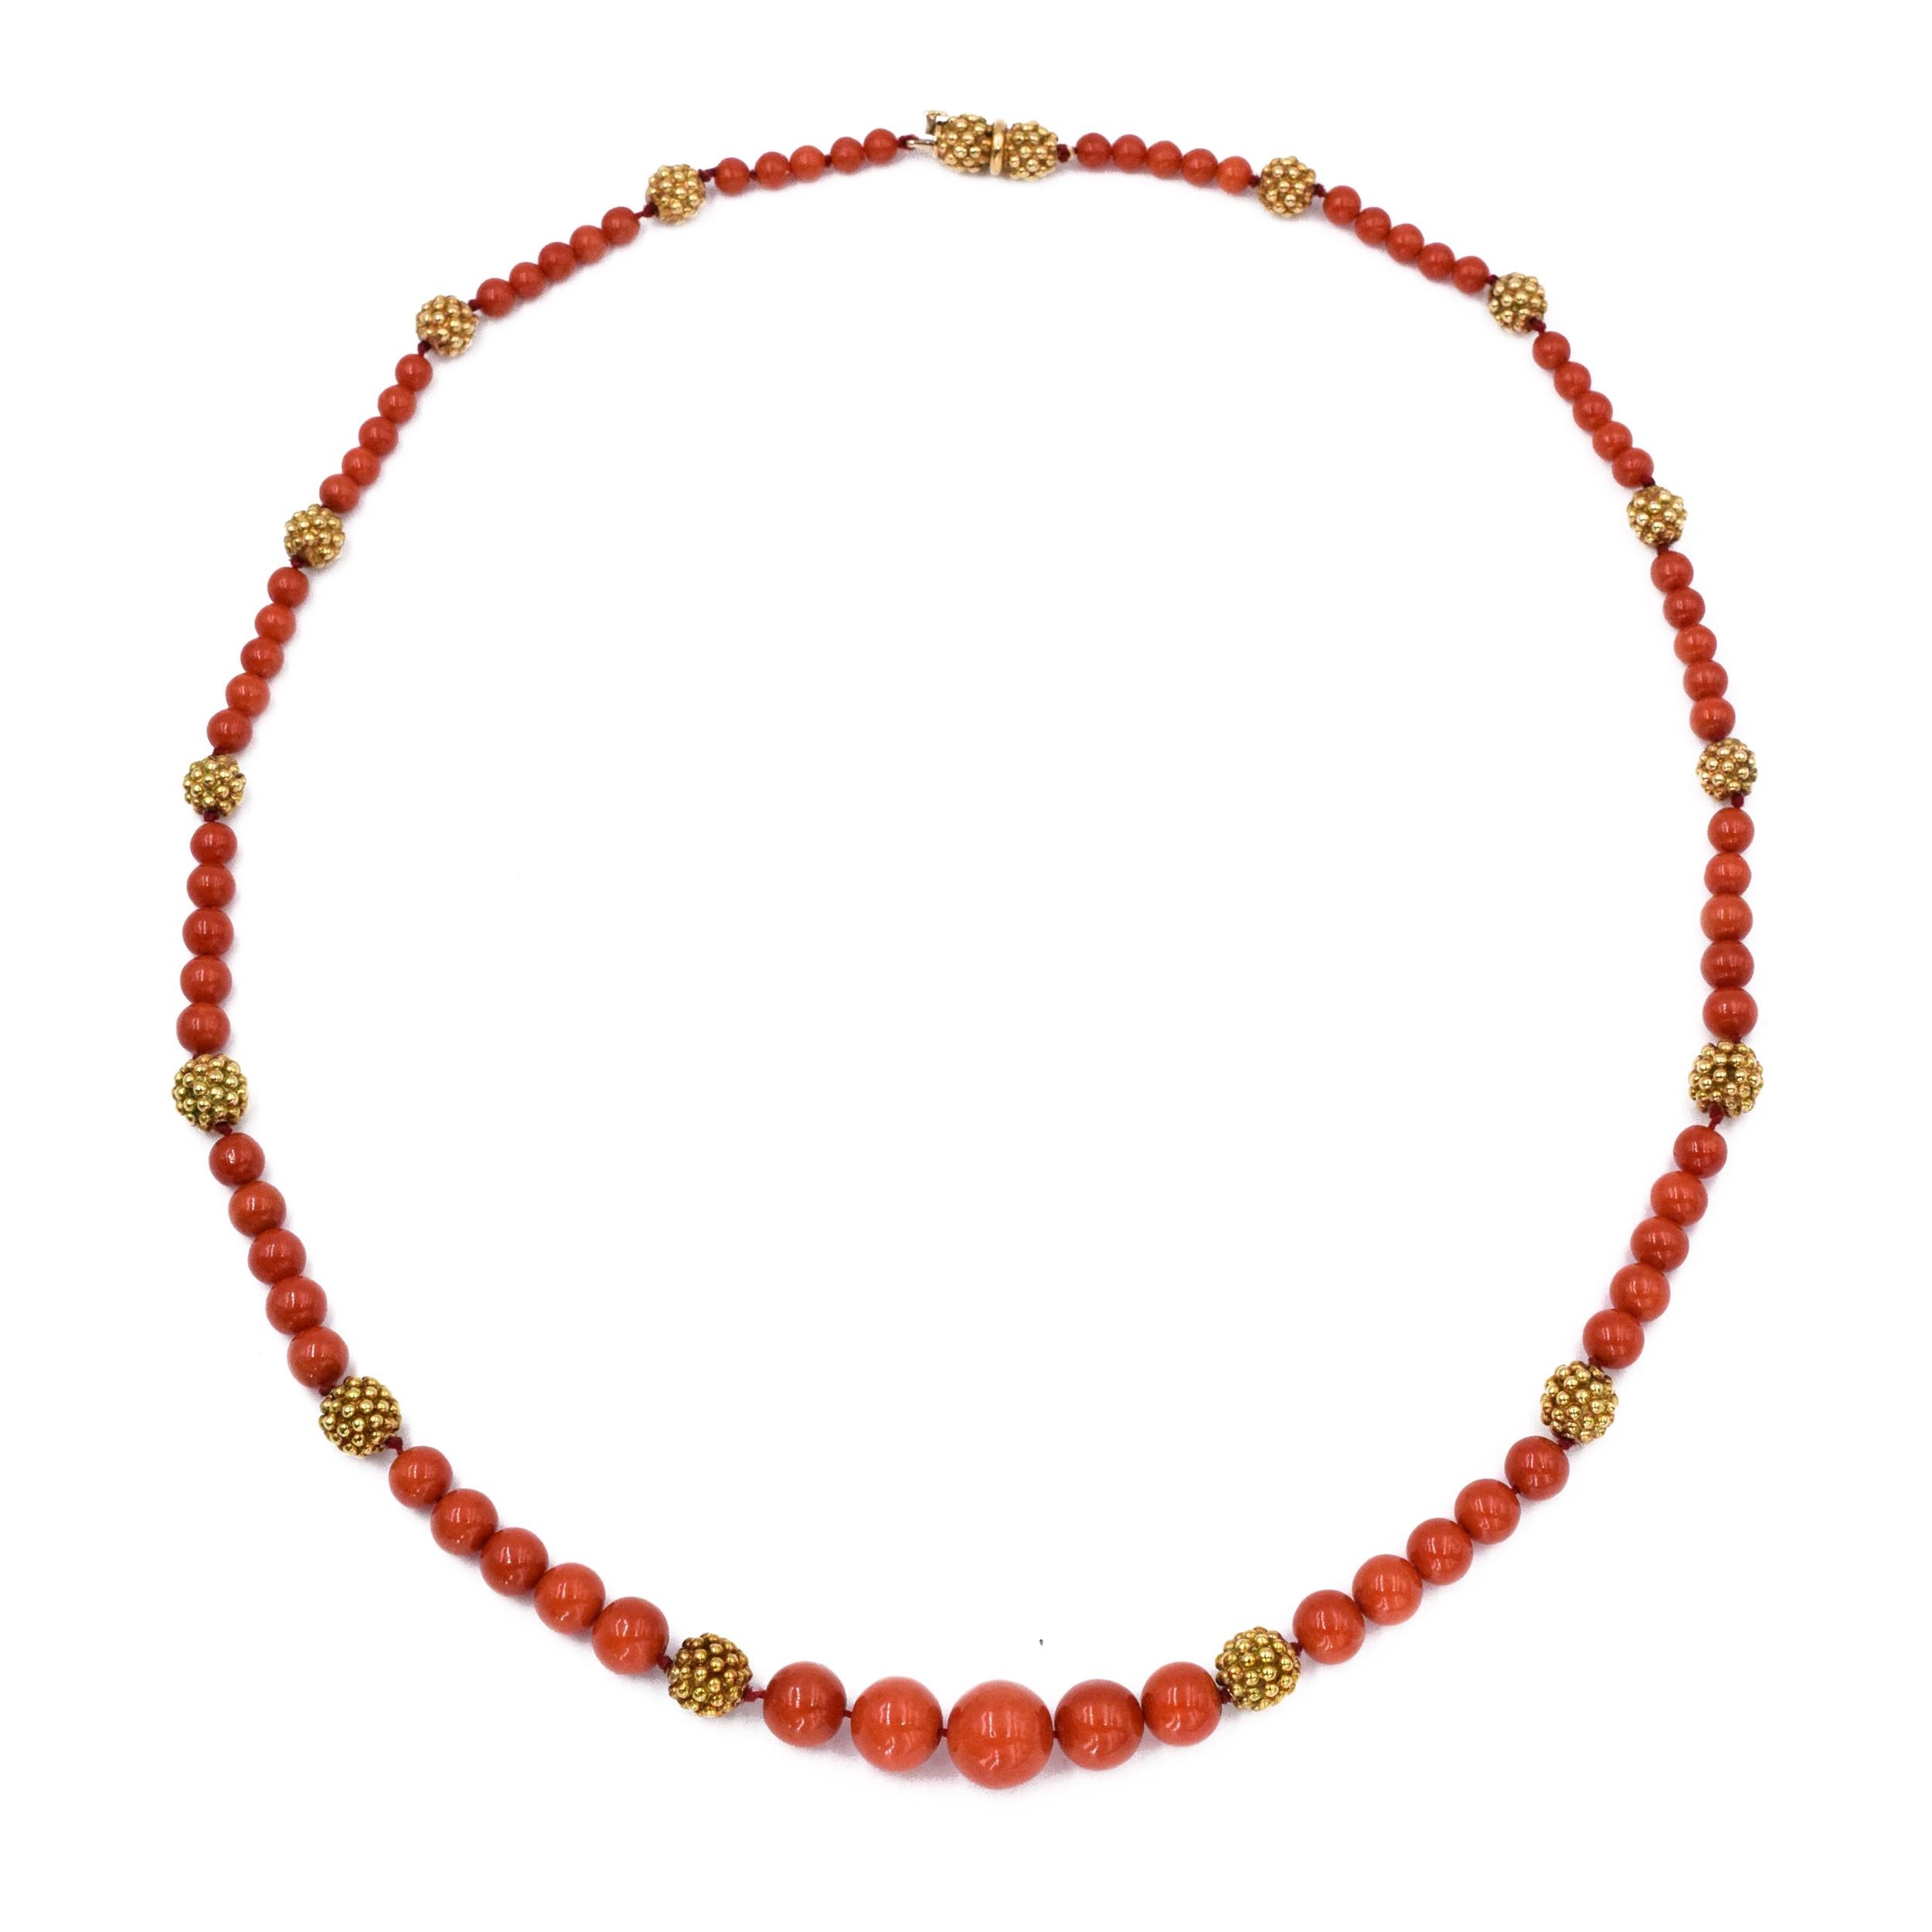  Van Cleef & Arpels composed of seventy-five coral beads, measuring approximately 11.9 to 4.6mm, interspersed with textured gold spheres
 Signed VCA NY, no XXXXXX
length: 24in.  18k gold 